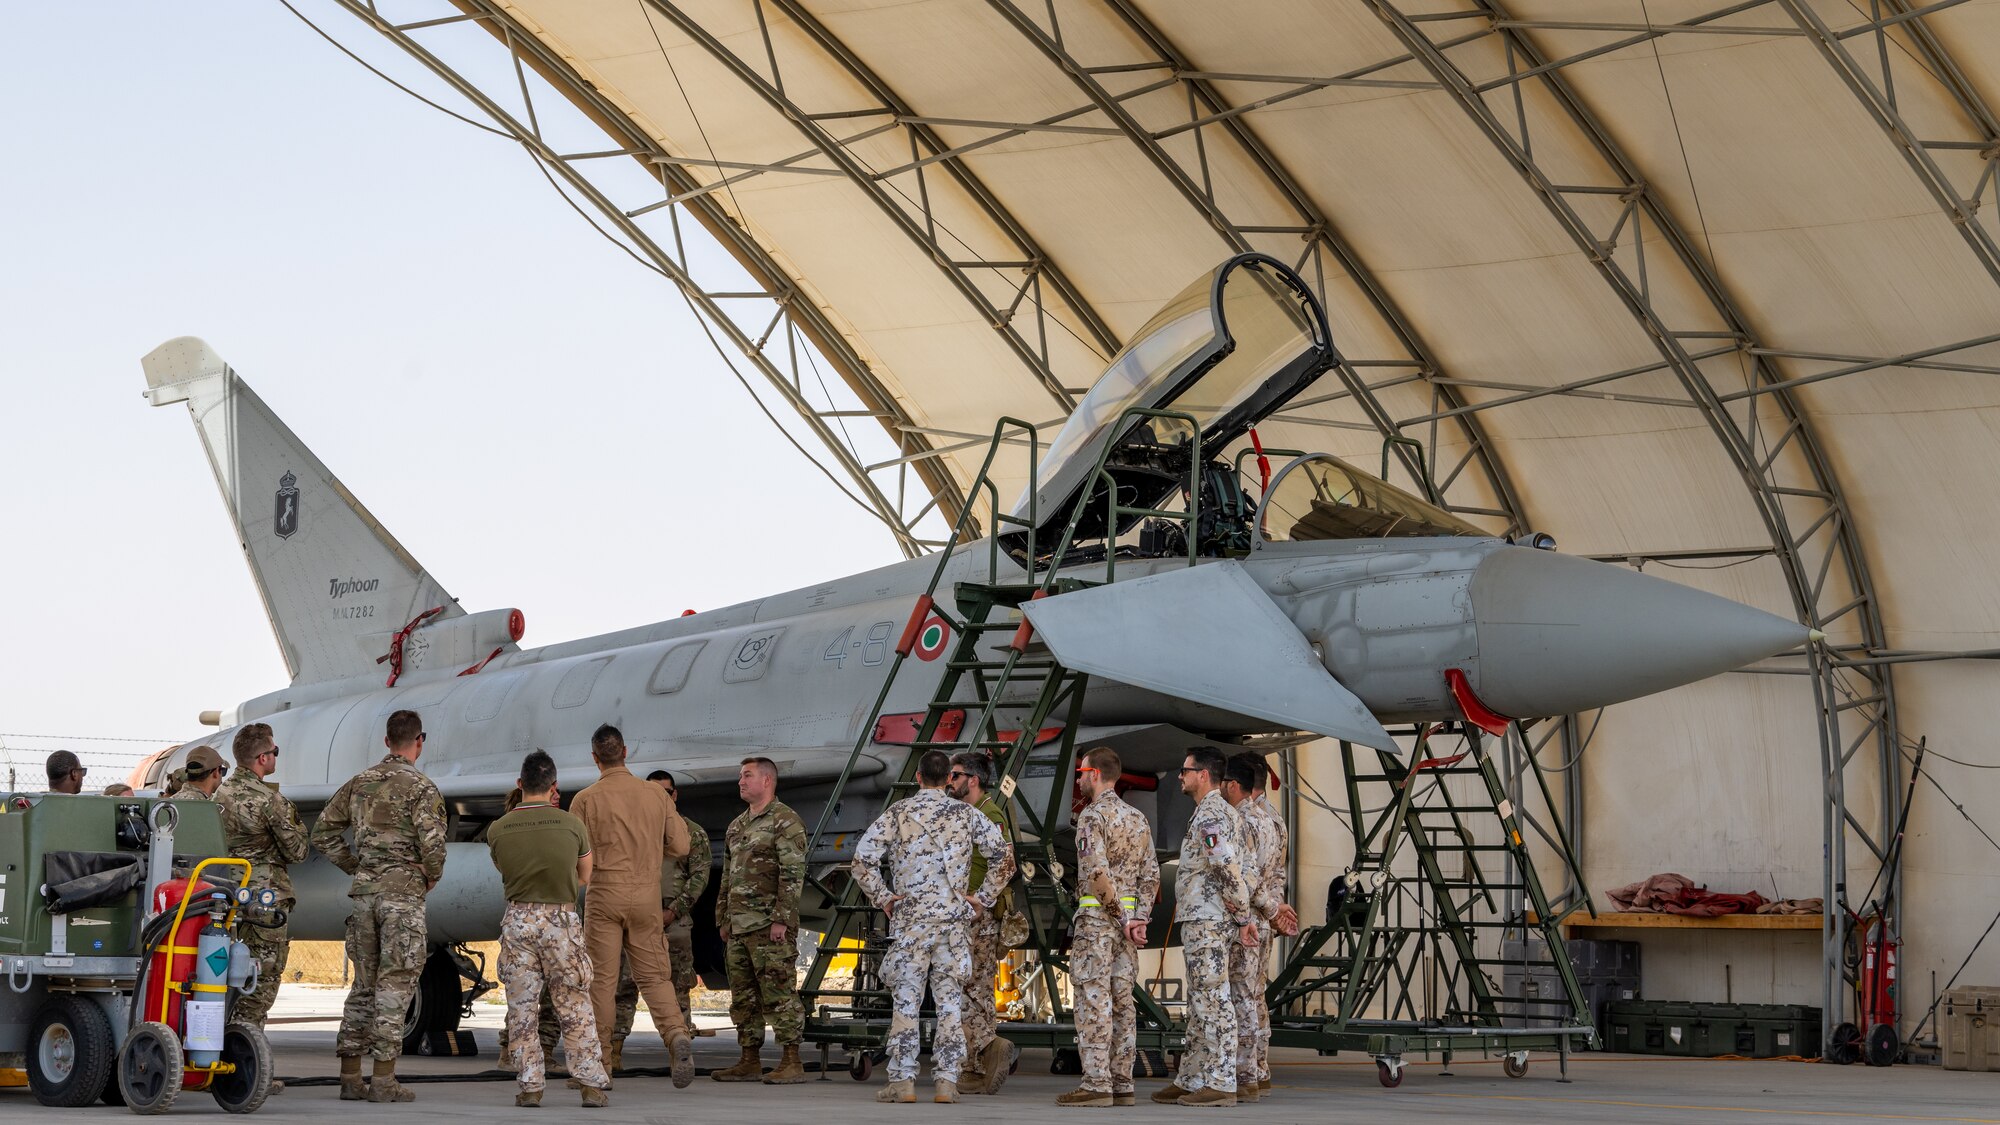 Service members of the U.S. Air Force, the U.S. Army and the Italian Air Force take a tour of an Italian Eurofighter Typhoon at Ali Al Salem Air Base, Kuwait, June 22, 2023. Sharing our knowledge and capabilities with one another is critical to increasing the interoperability of our forces, and projecting decisive coalition combat power. (U.S. Air Force photo by Staff Sgt. Kevin Long)